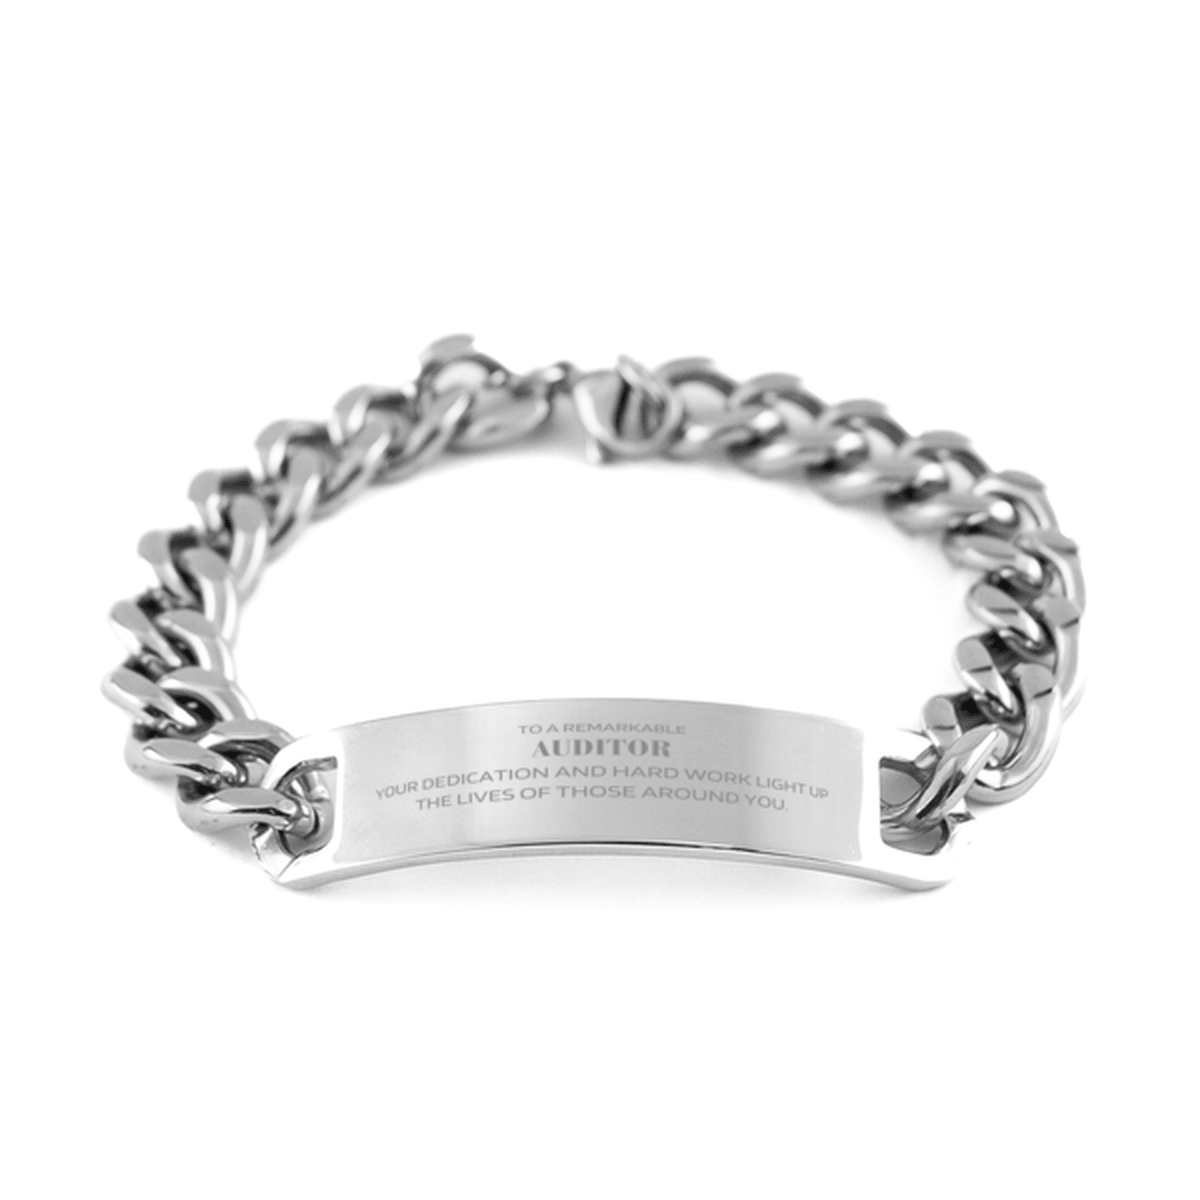 Remarkable Auditor Gifts, Your dedication and hard work, Inspirational Birthday Christmas Unique Cuban Chain Stainless Steel Bracelet For Auditor, Coworkers, Men, Women, Friends - Mallard Moon Gift Shop